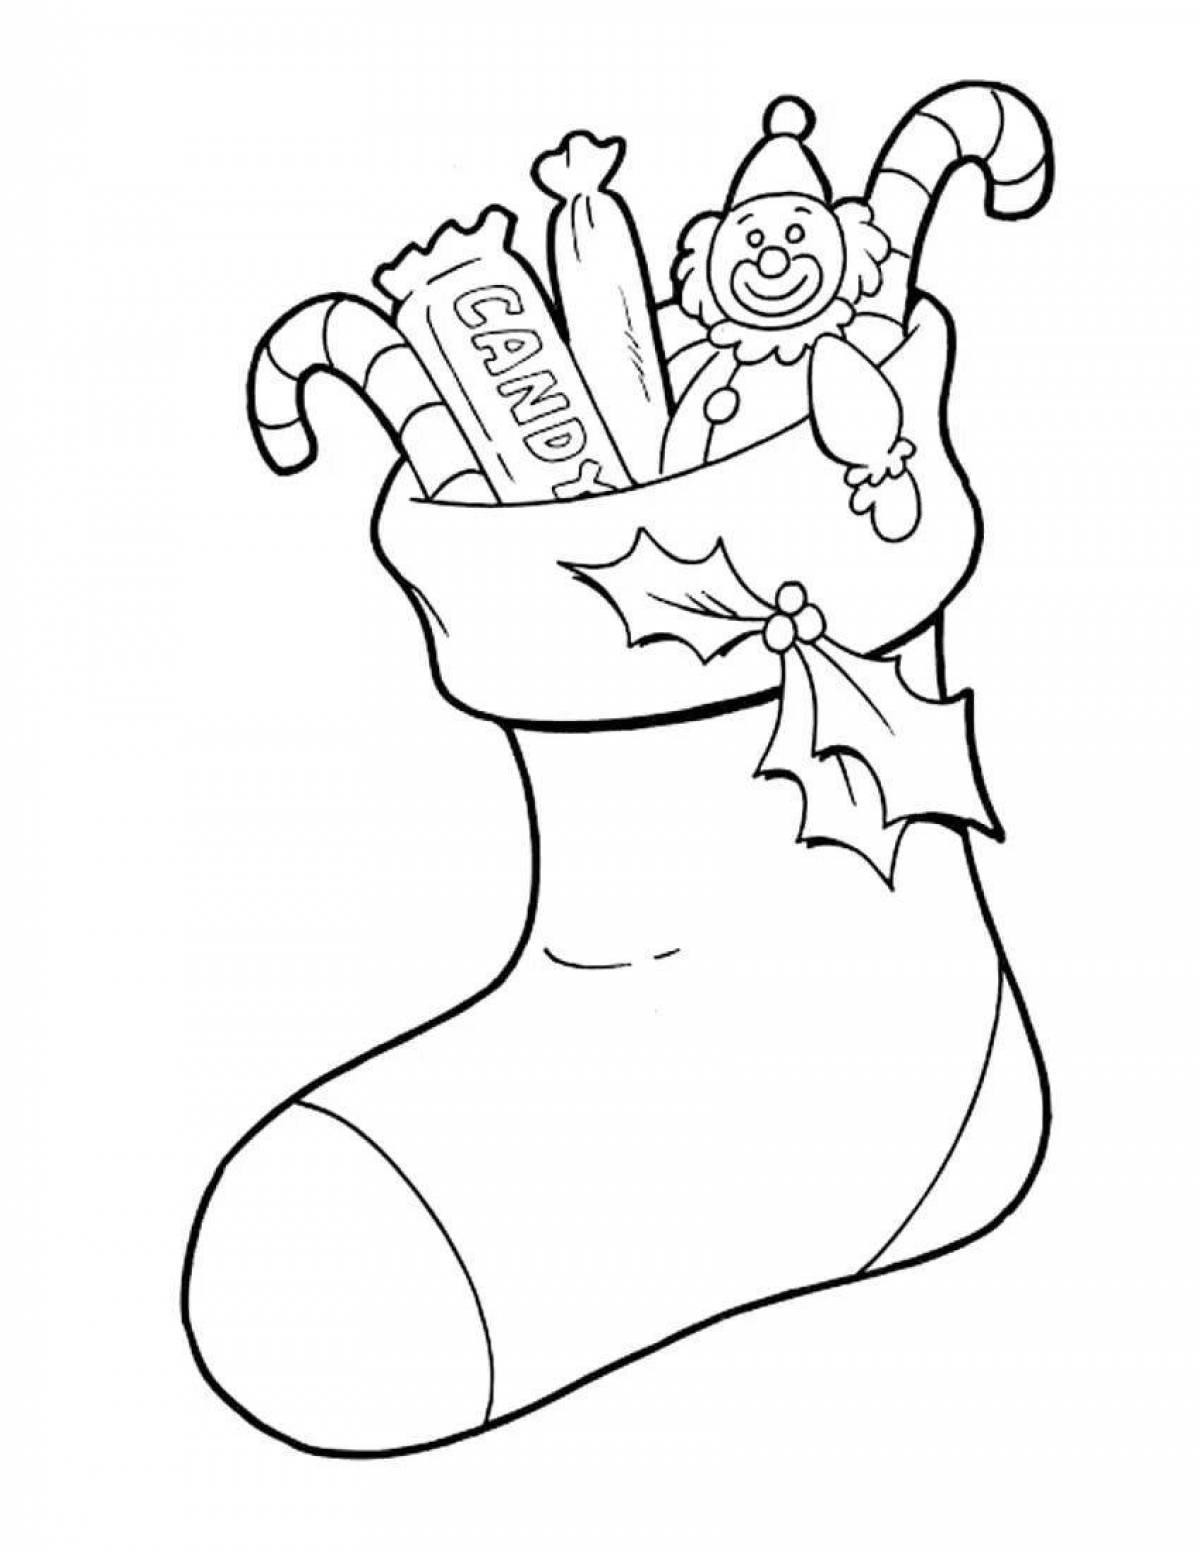 Christmas boot with ornaments coloring page